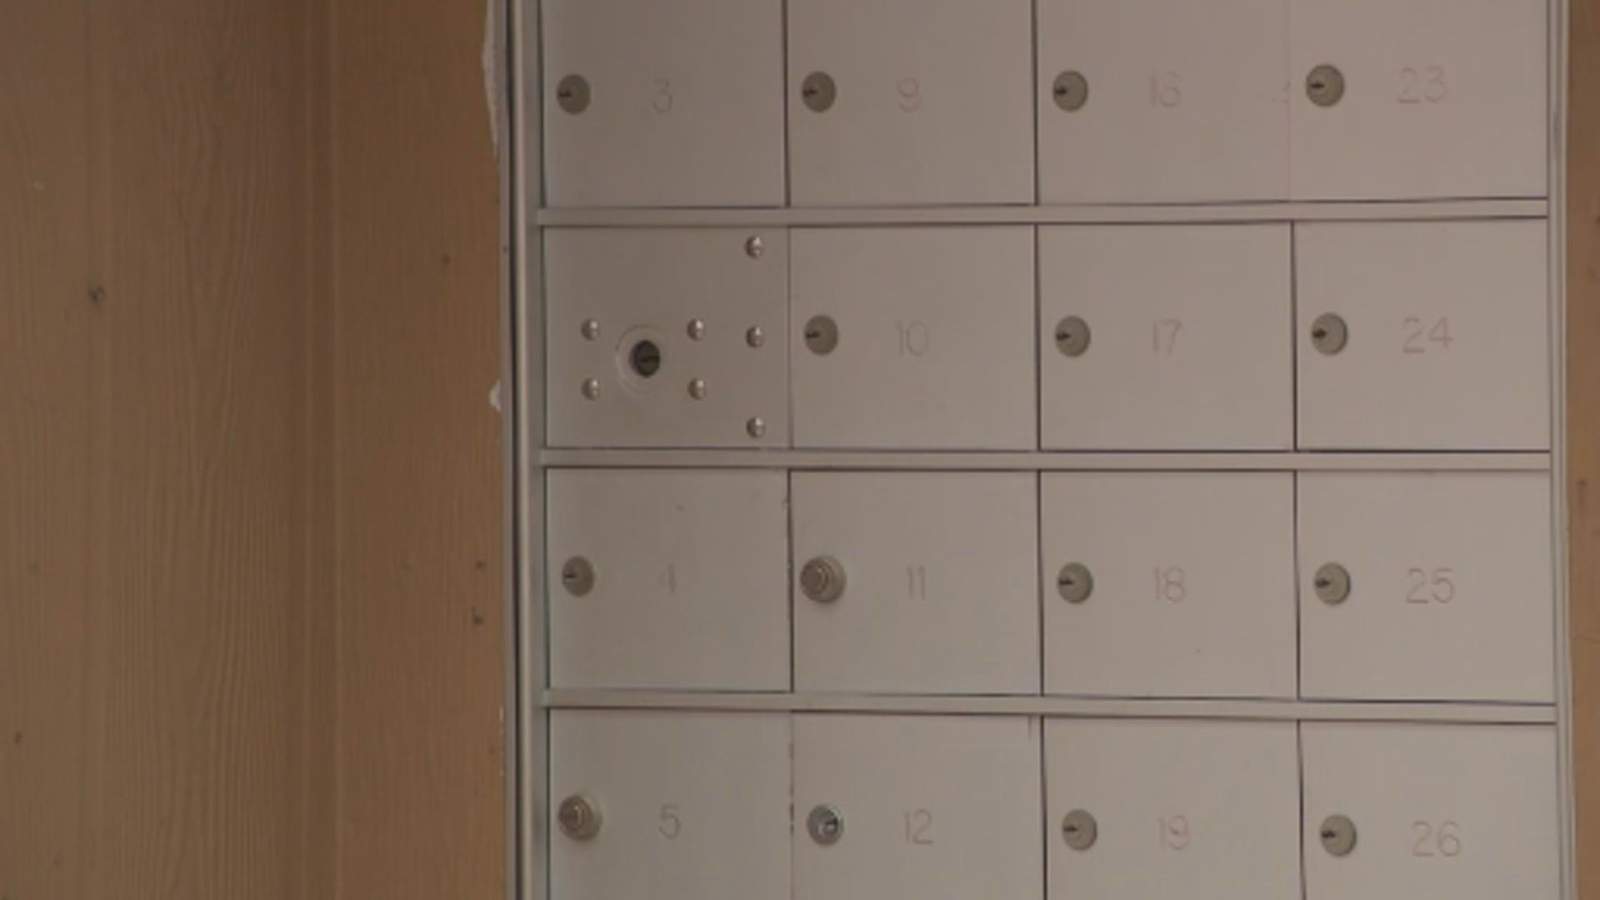 Video: Mail thieves target gated townhomes near Galleria area